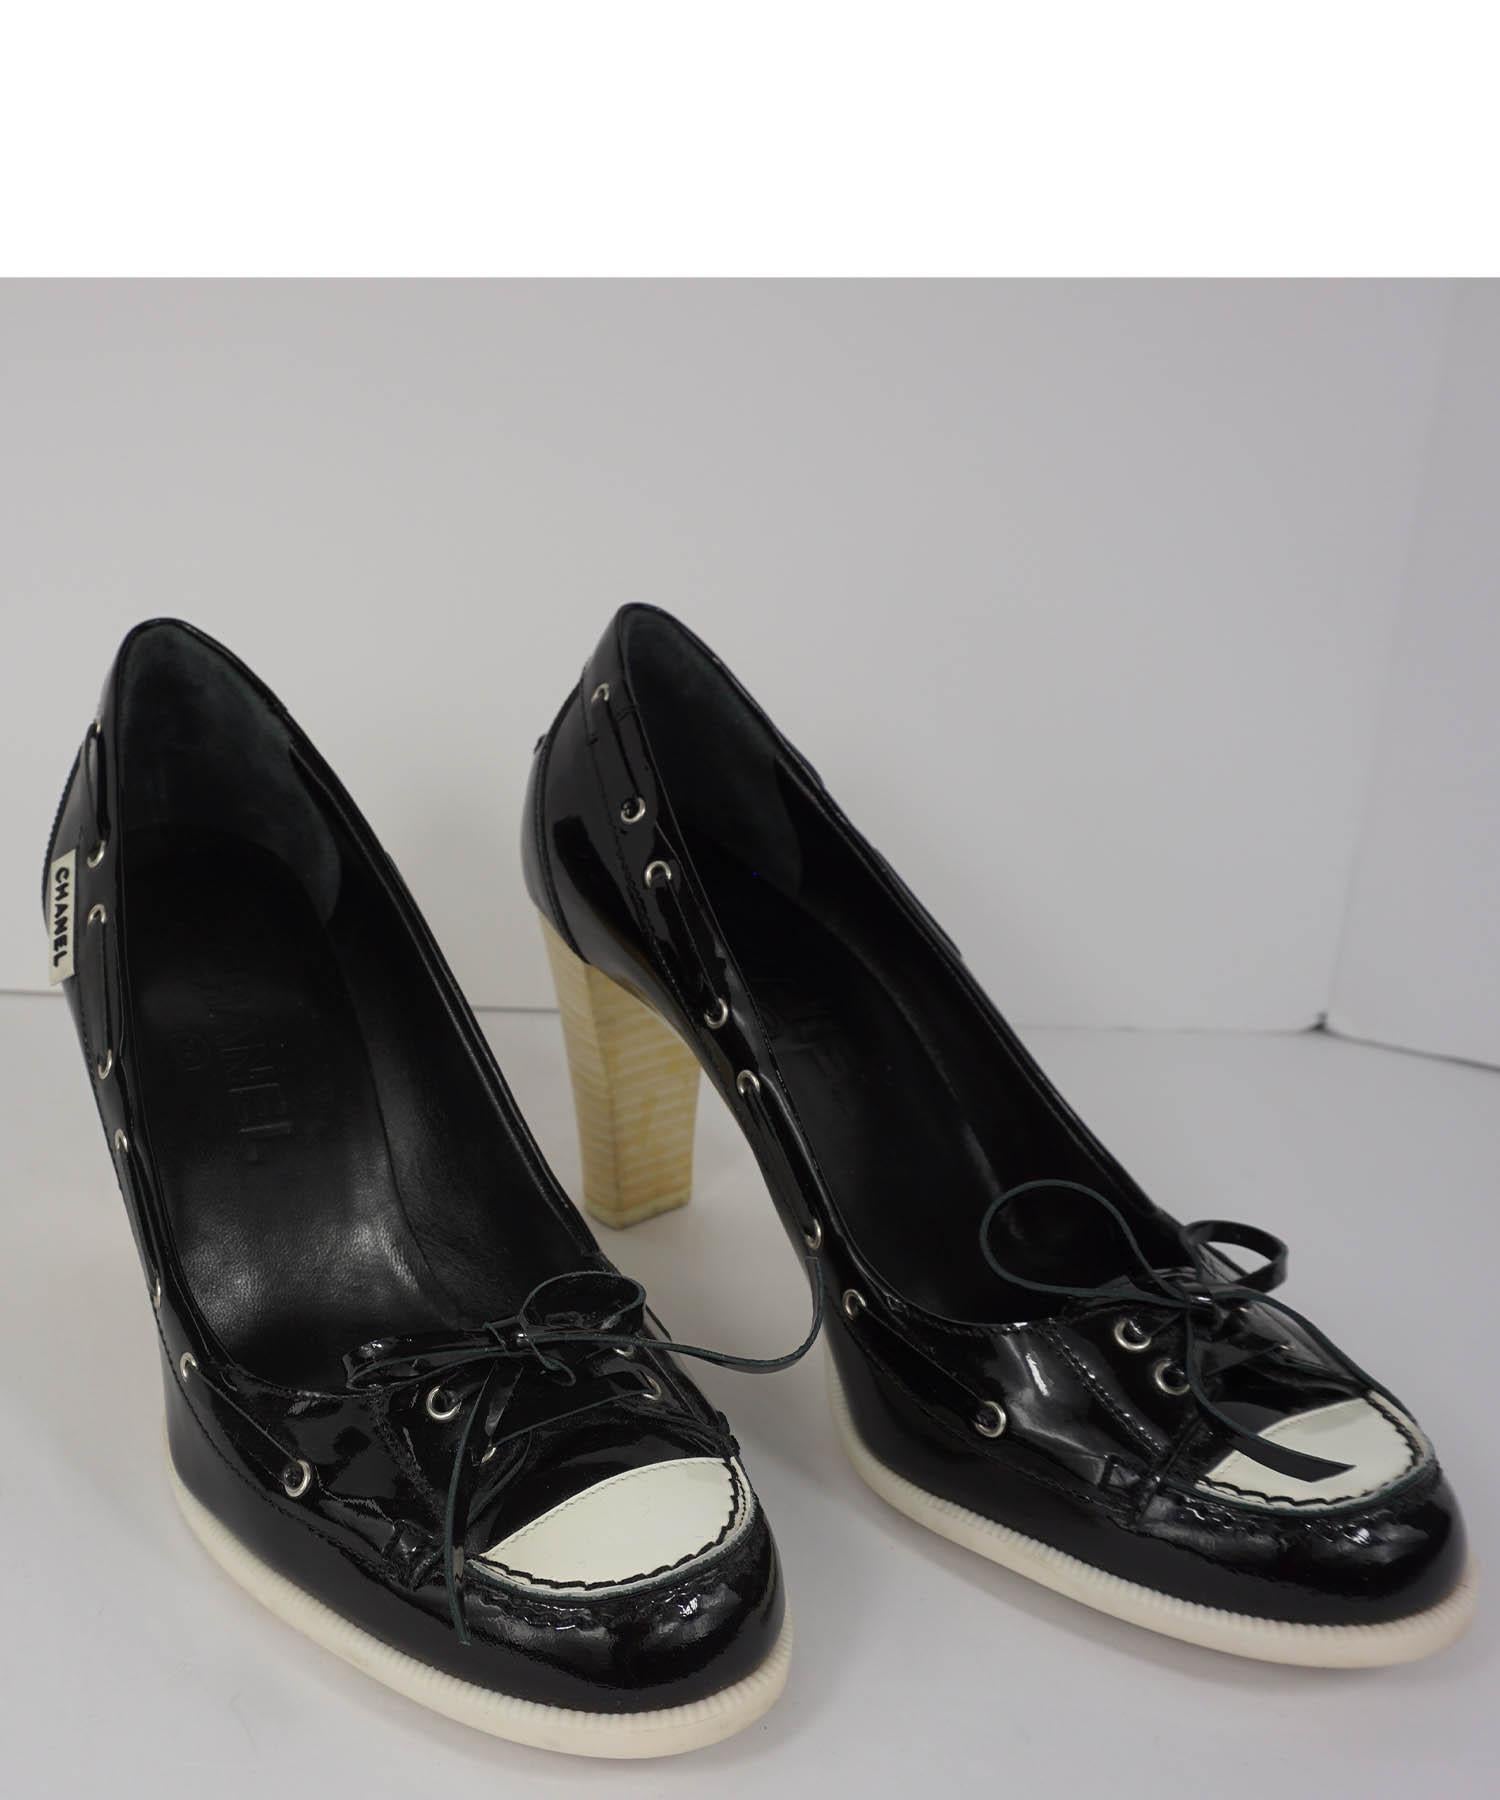 Chanel Black and White Patent Leather Boat Shoe Pumps Size 38